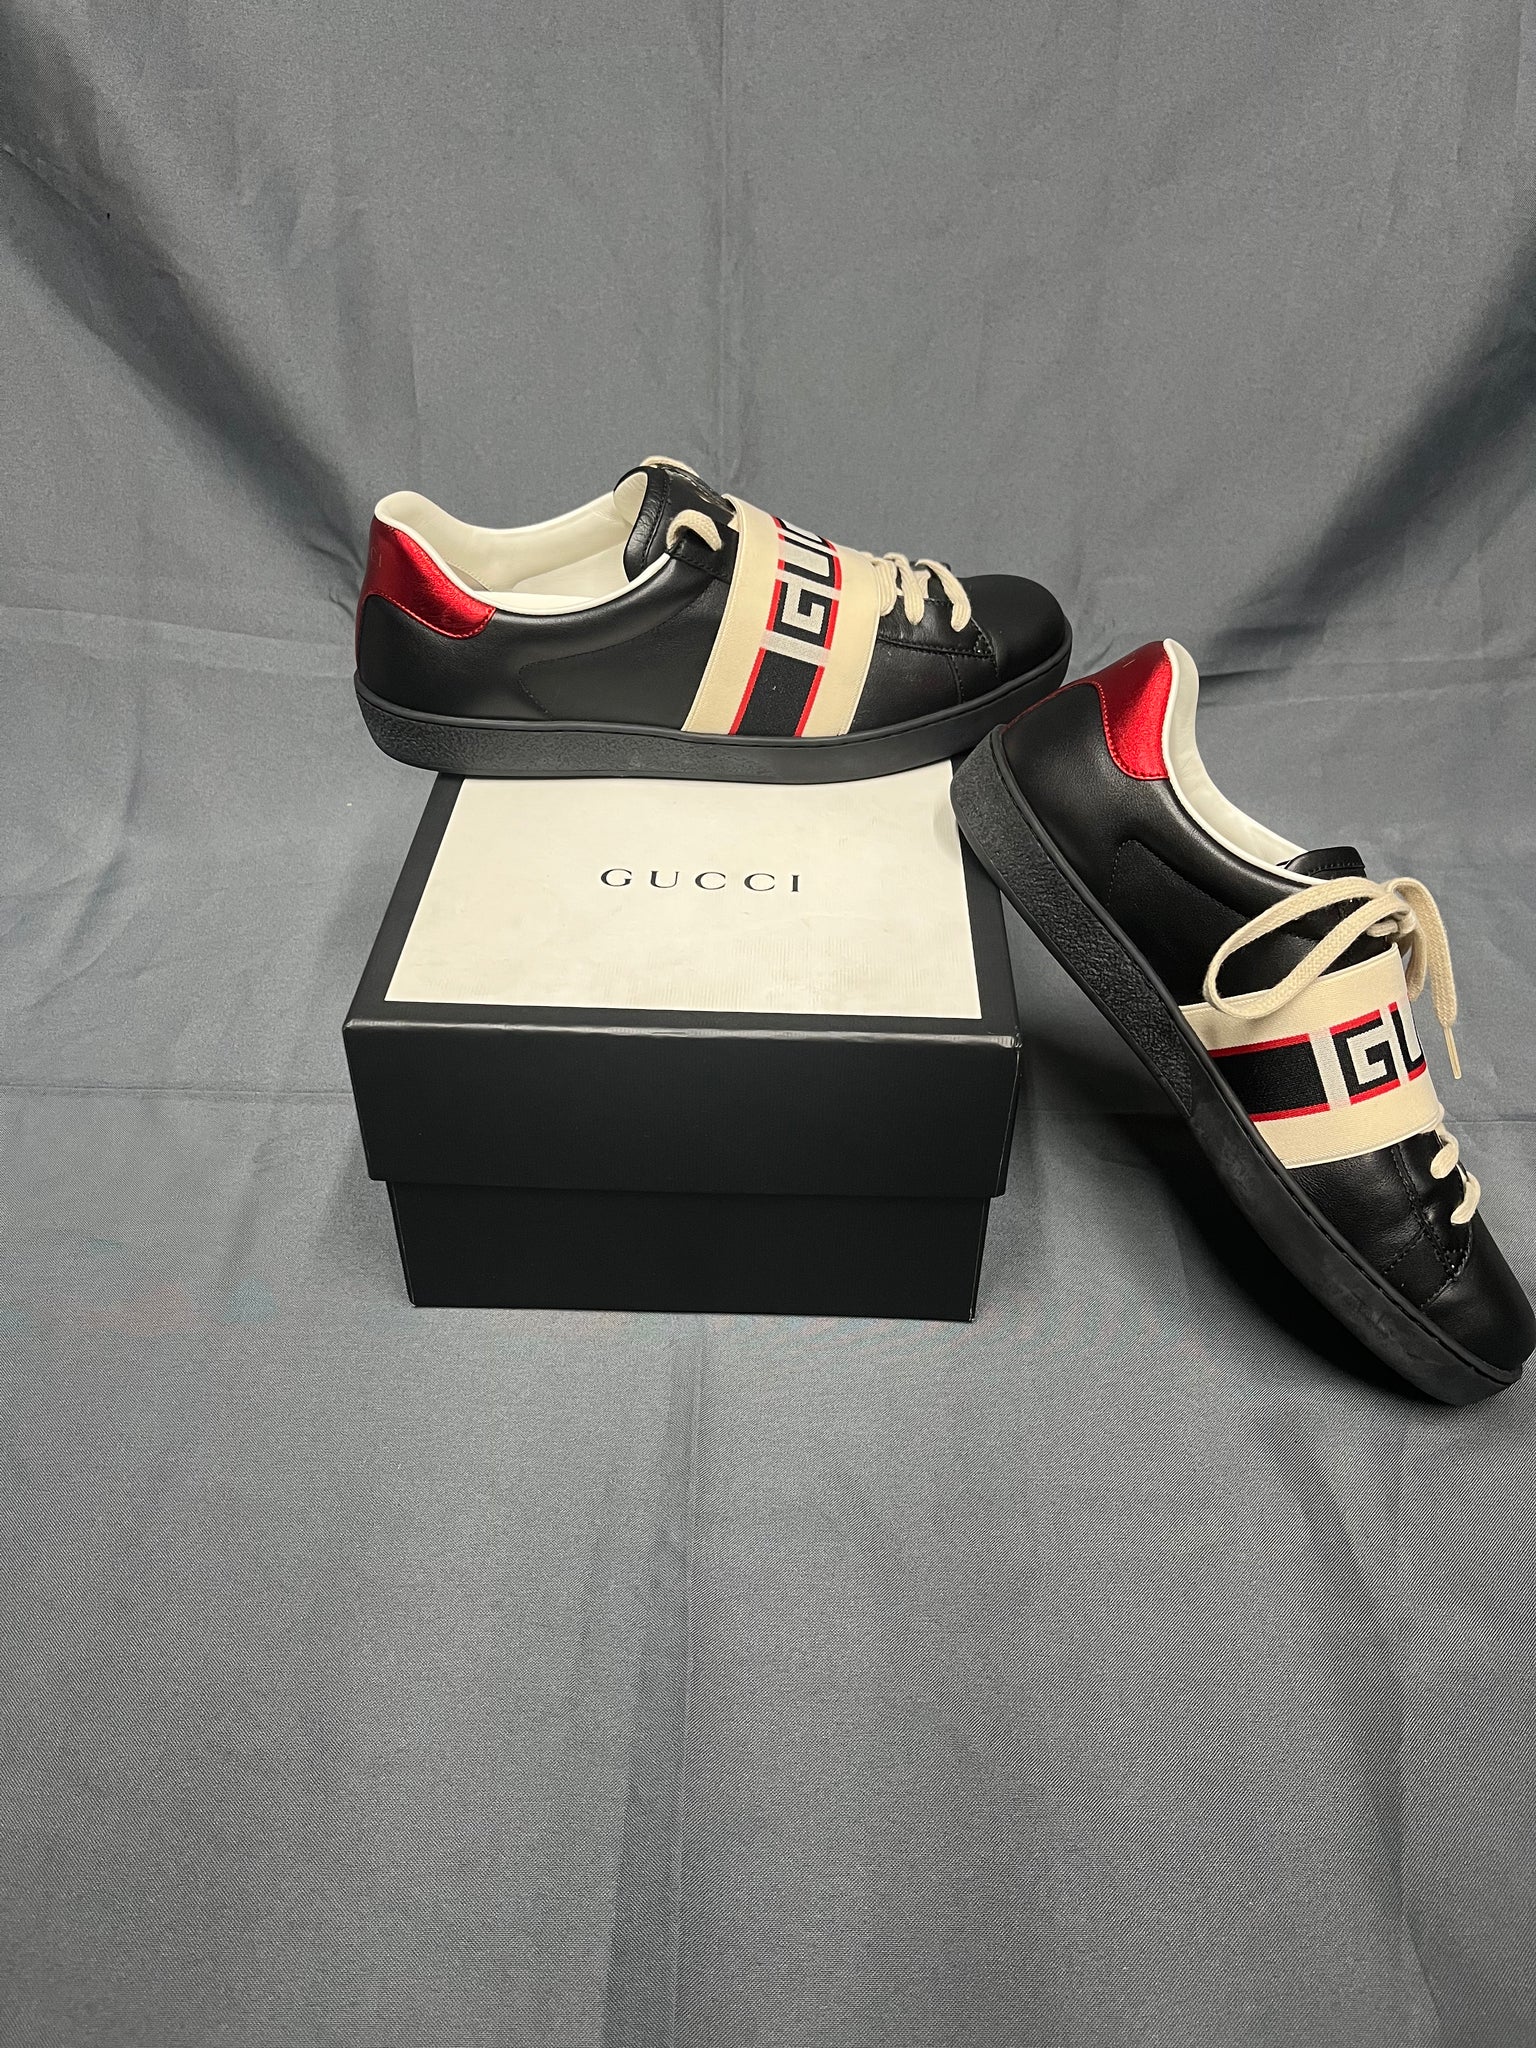 Gucci Elastic Ace Sneakers – Uptown Cheapskate Torrance